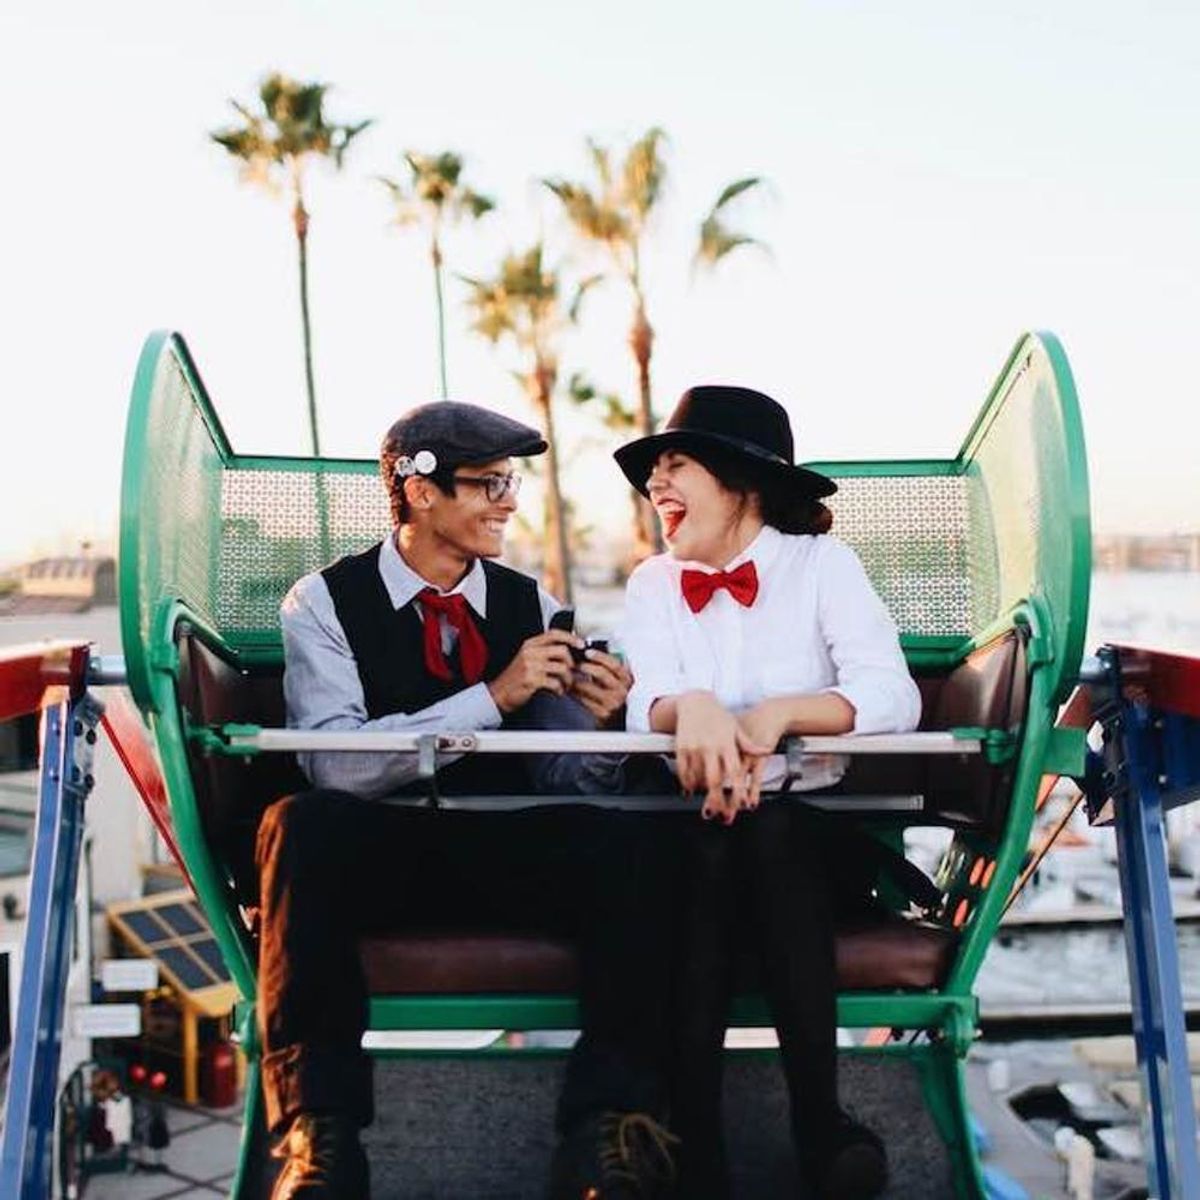 This Couple’s Mary Poppins-Inspired Ferris Wheel Proposal Is Up to the Highest Heights